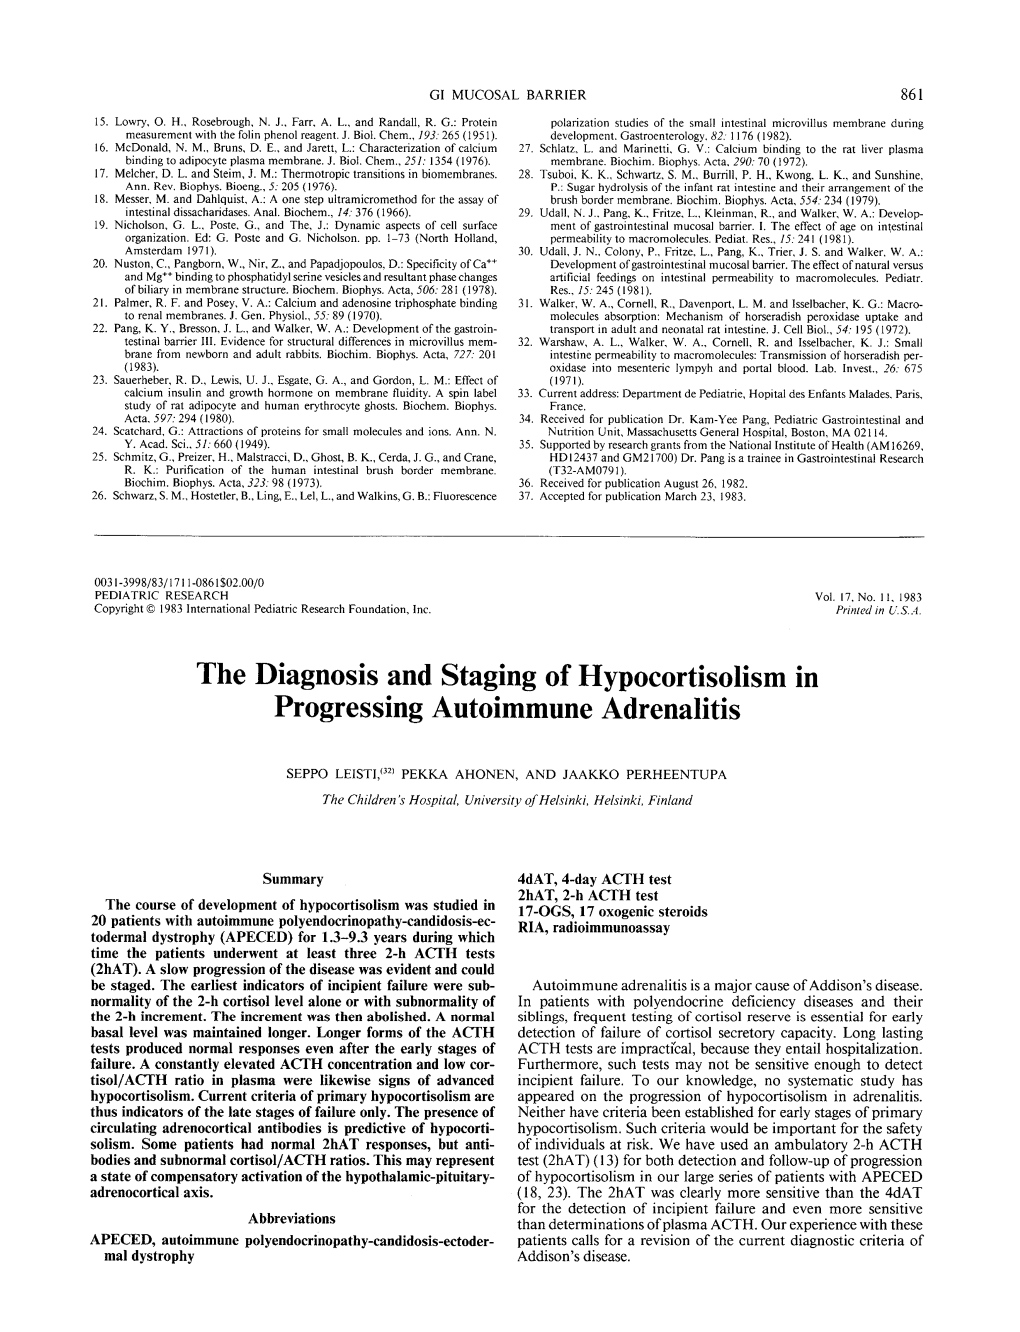 The Diagnosis and Staging of Hypocortisolism in Progressing Autoimmune Adrenalitis